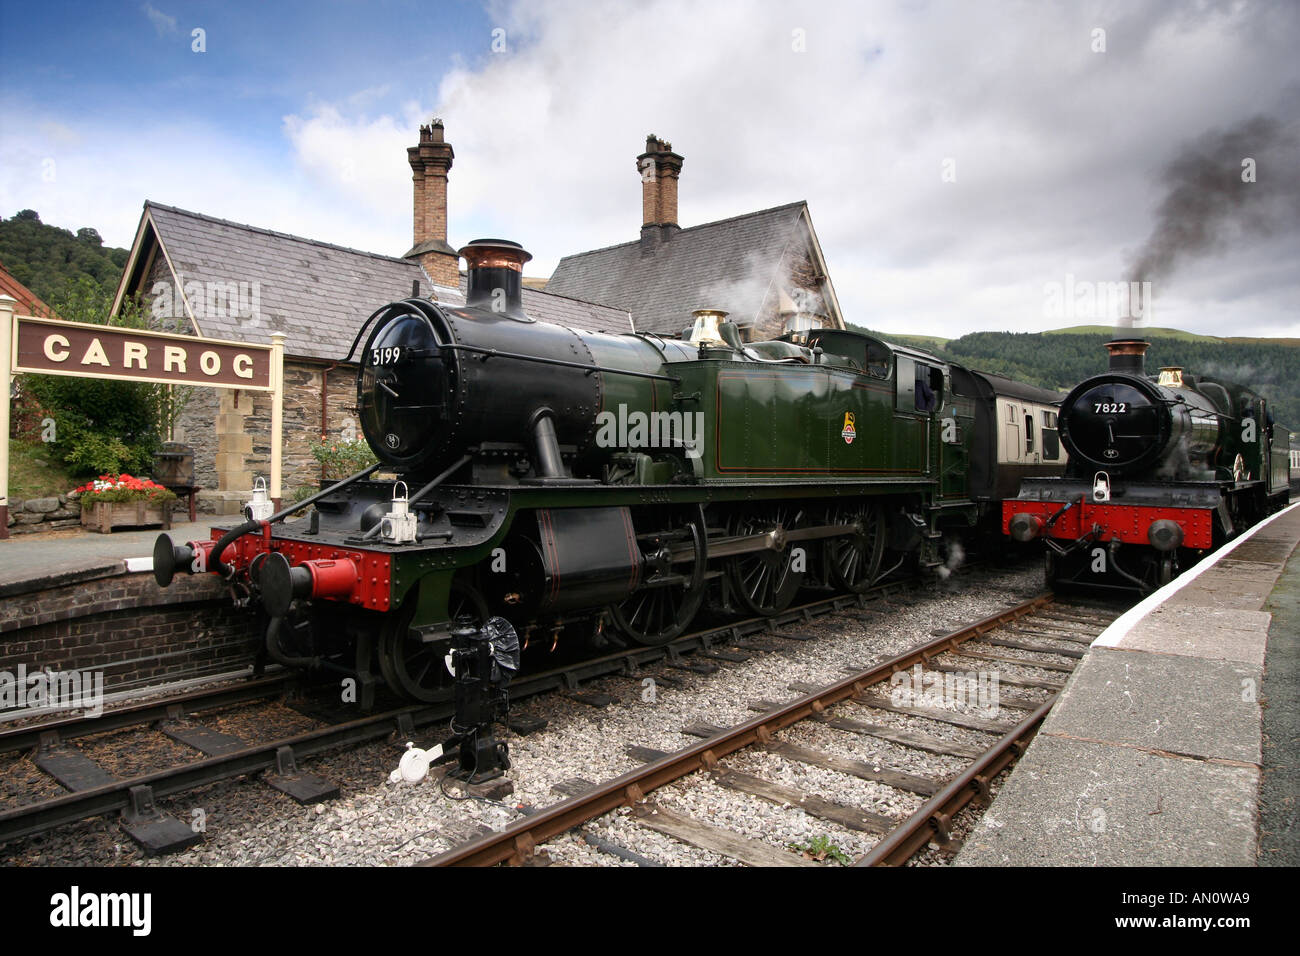 Carrog Station and No 5199 and 7822 Stock Photo